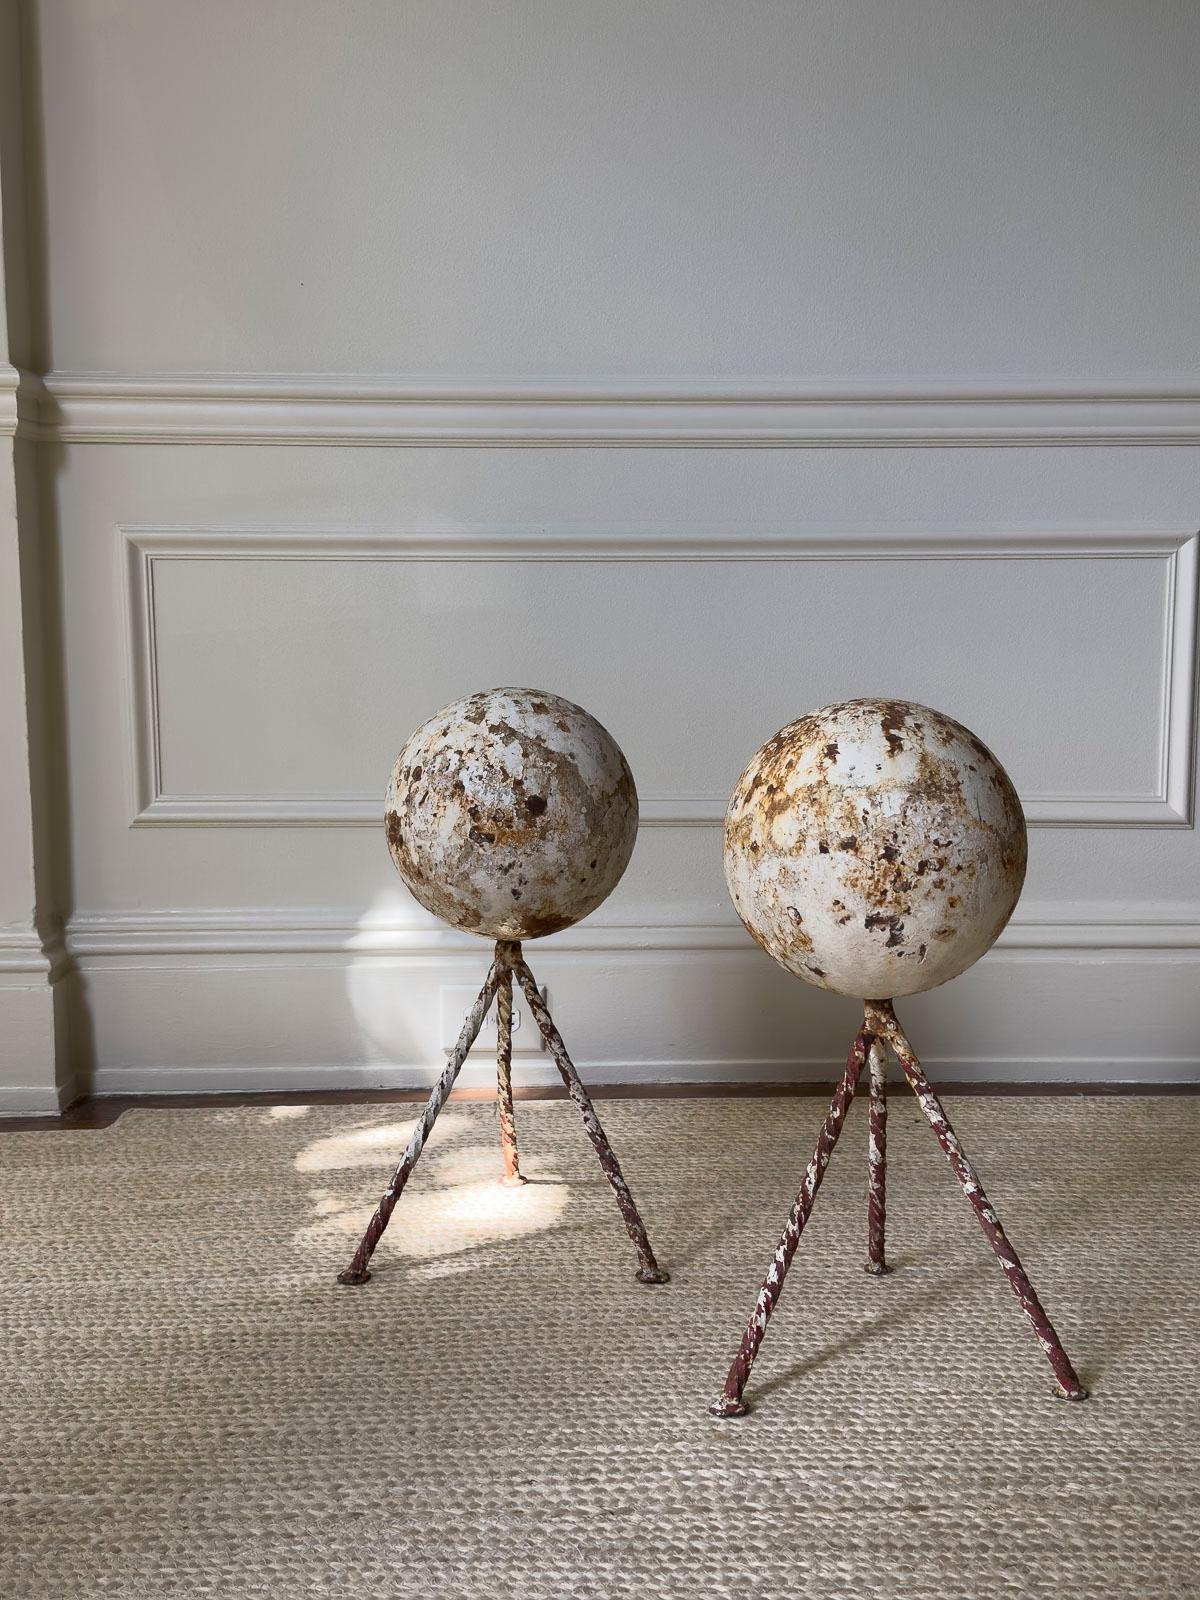 Iron orb sculptures with integrated rebar legs for indoor or out with wonderful texture and rusted patina. Sold individually.

These orbs make a wonderful statement in the garden or in an interior. 

Shown with art and objects from Lars Ly: The